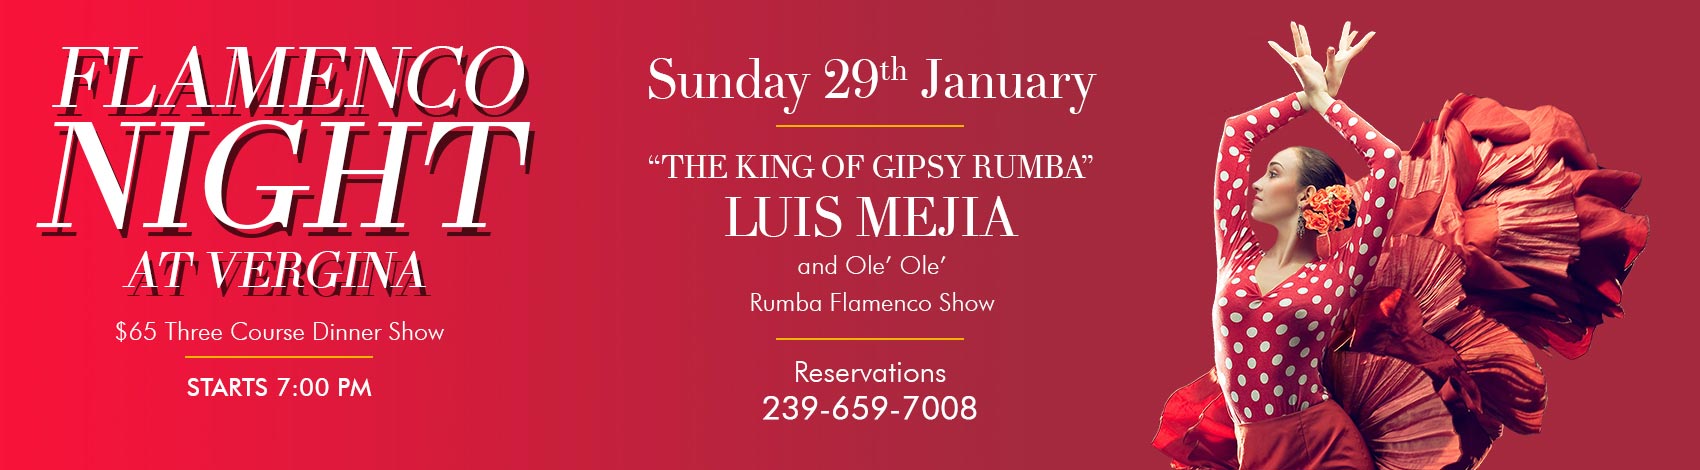 Jauaray 29th The King of Gipsy Rumba LUIS MEJIA and Ole’ Ole’ Rumba Flamenco Show $65 Three Course Dinner Show STARTS 7:00 PM